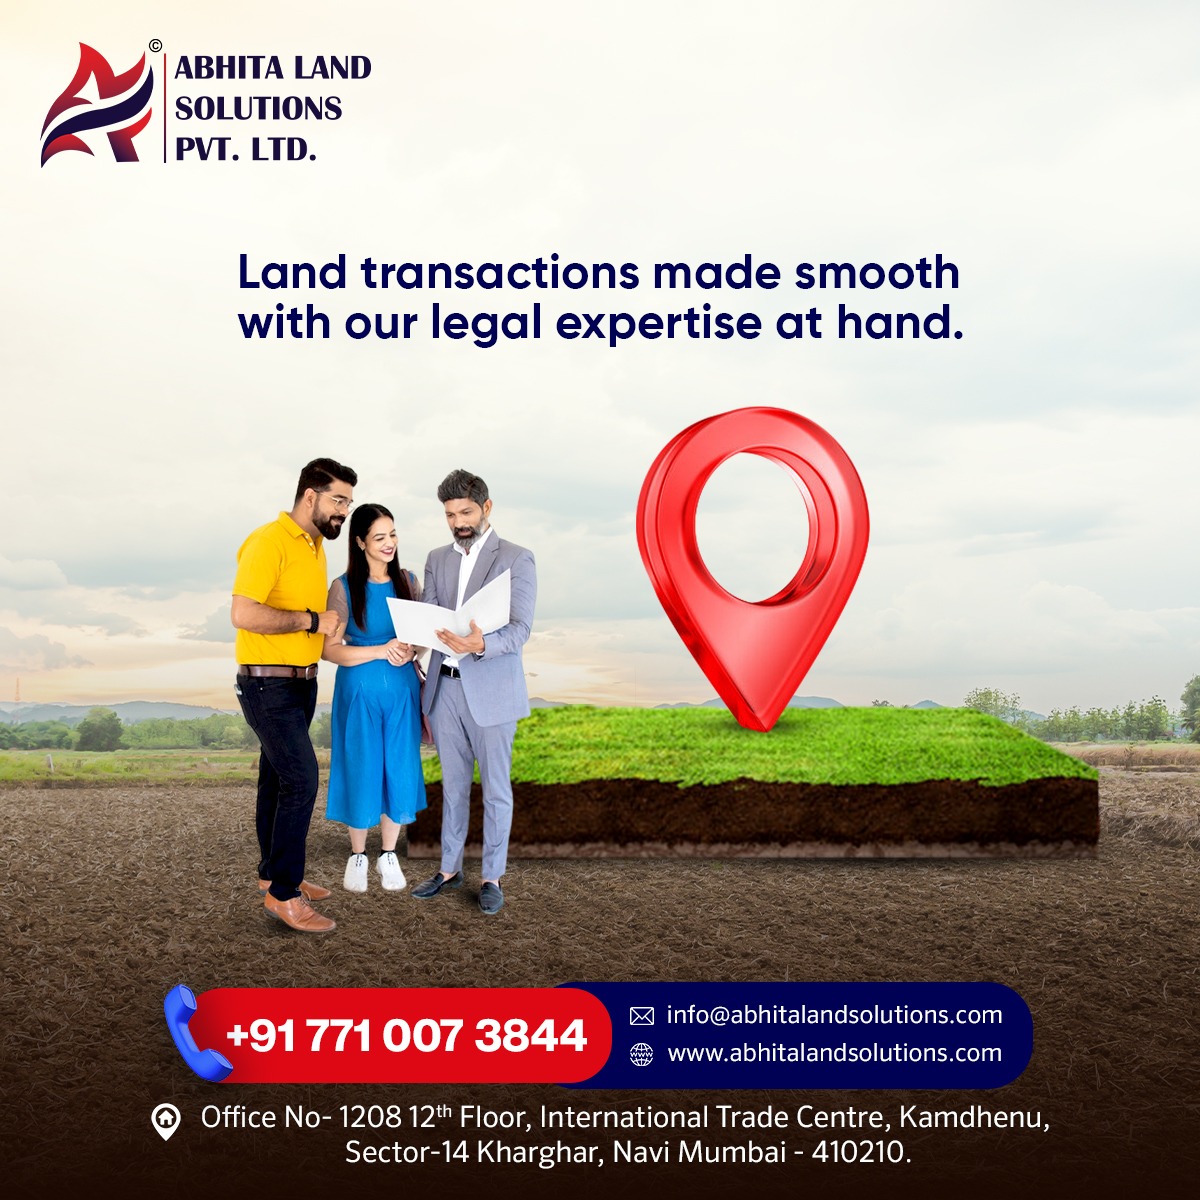 Navigate the complexities of land transactions effortlessly with our expert legal guidance by your side. 🏞️✍️ #LandDisputes #LandMatters #LandRights #LegalAdvice #LegalServices #LegalSolutions #landsolution #landservice #LegalExperts #abhitalandsolutions #pune #navimumbai